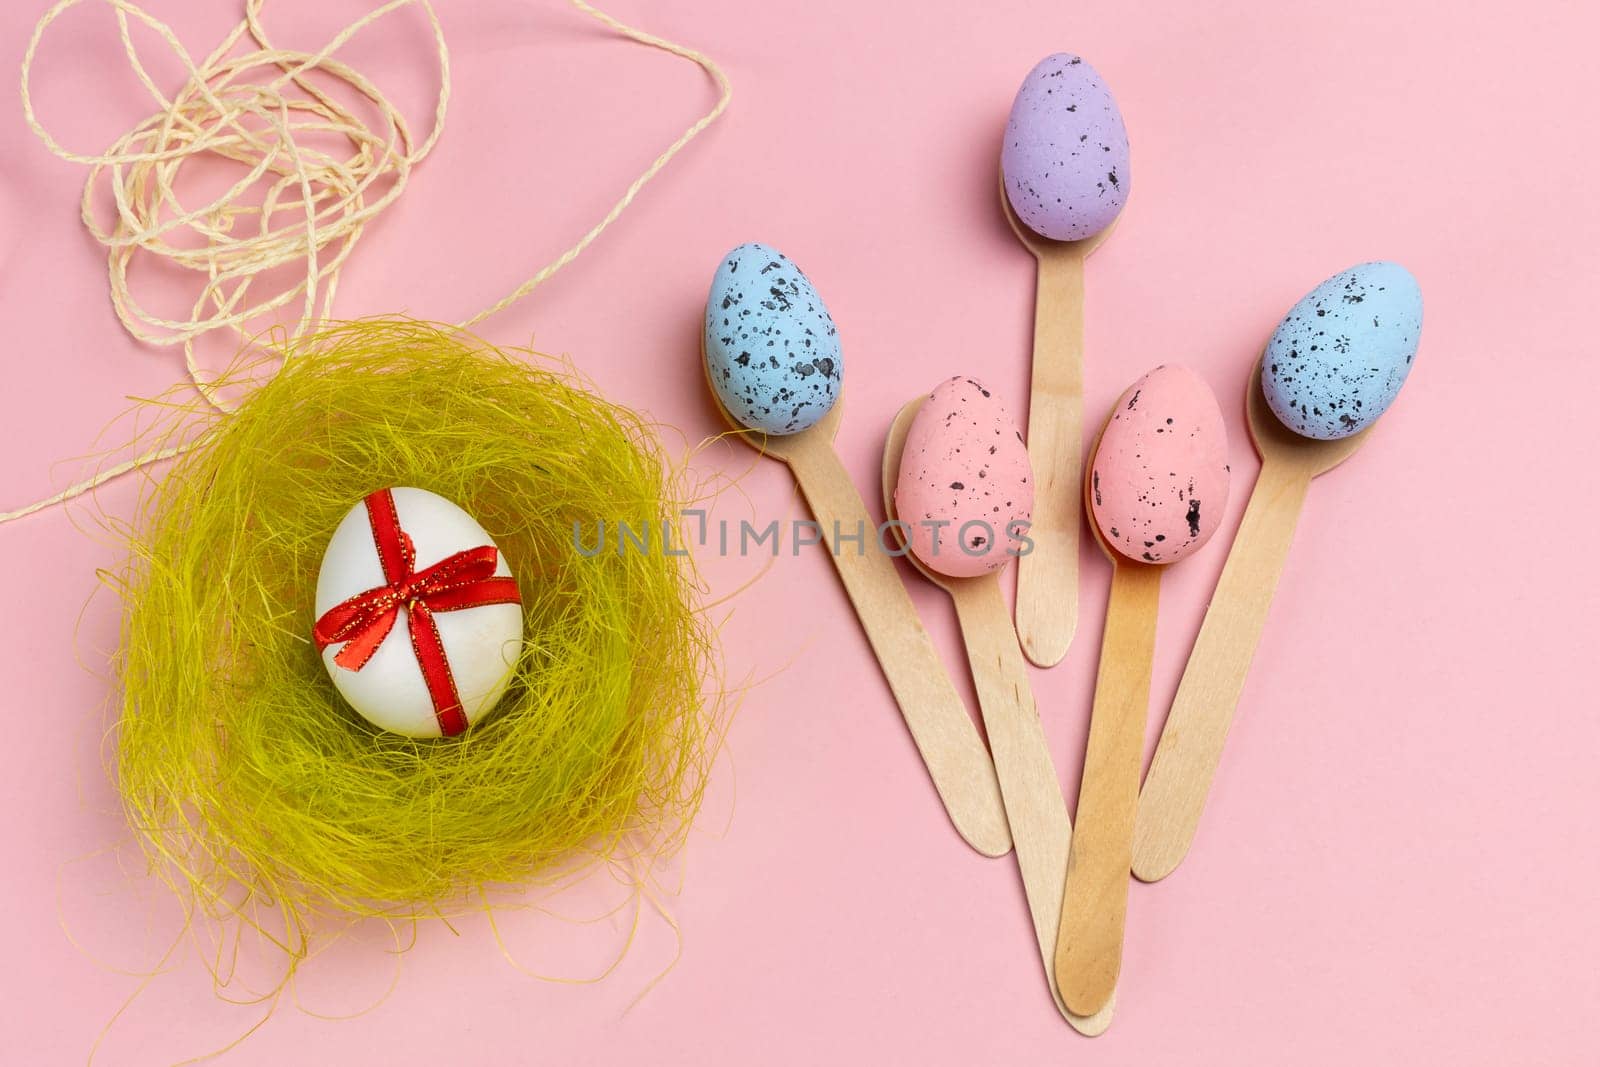 Colored Easter eggs with wooden spoons and a nest. by mvg6894